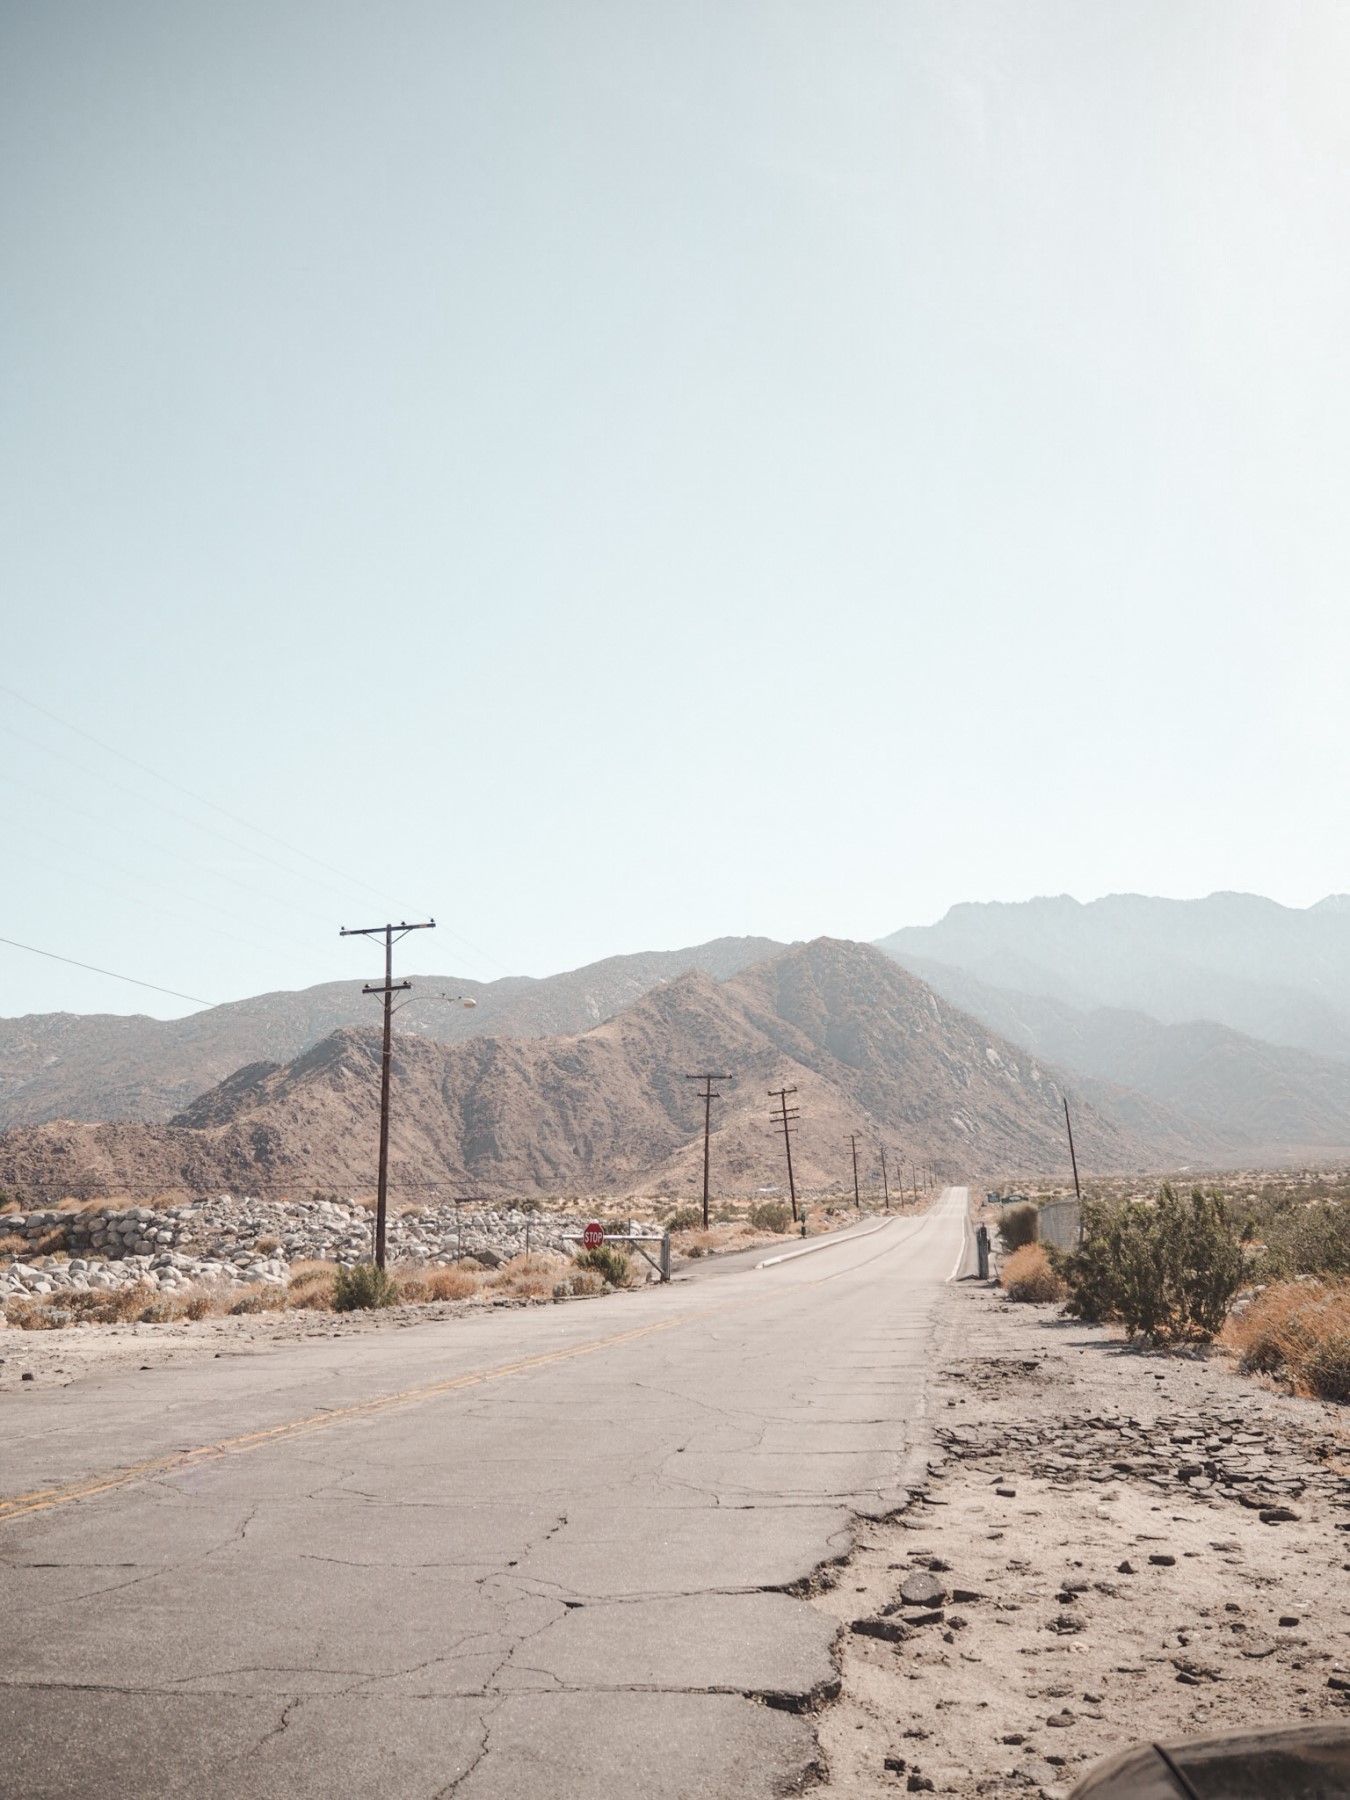 The Best Underrated Photography Spots in Palm Springs | lifestyletraveler.co | IG: @lifestyletraveler.co